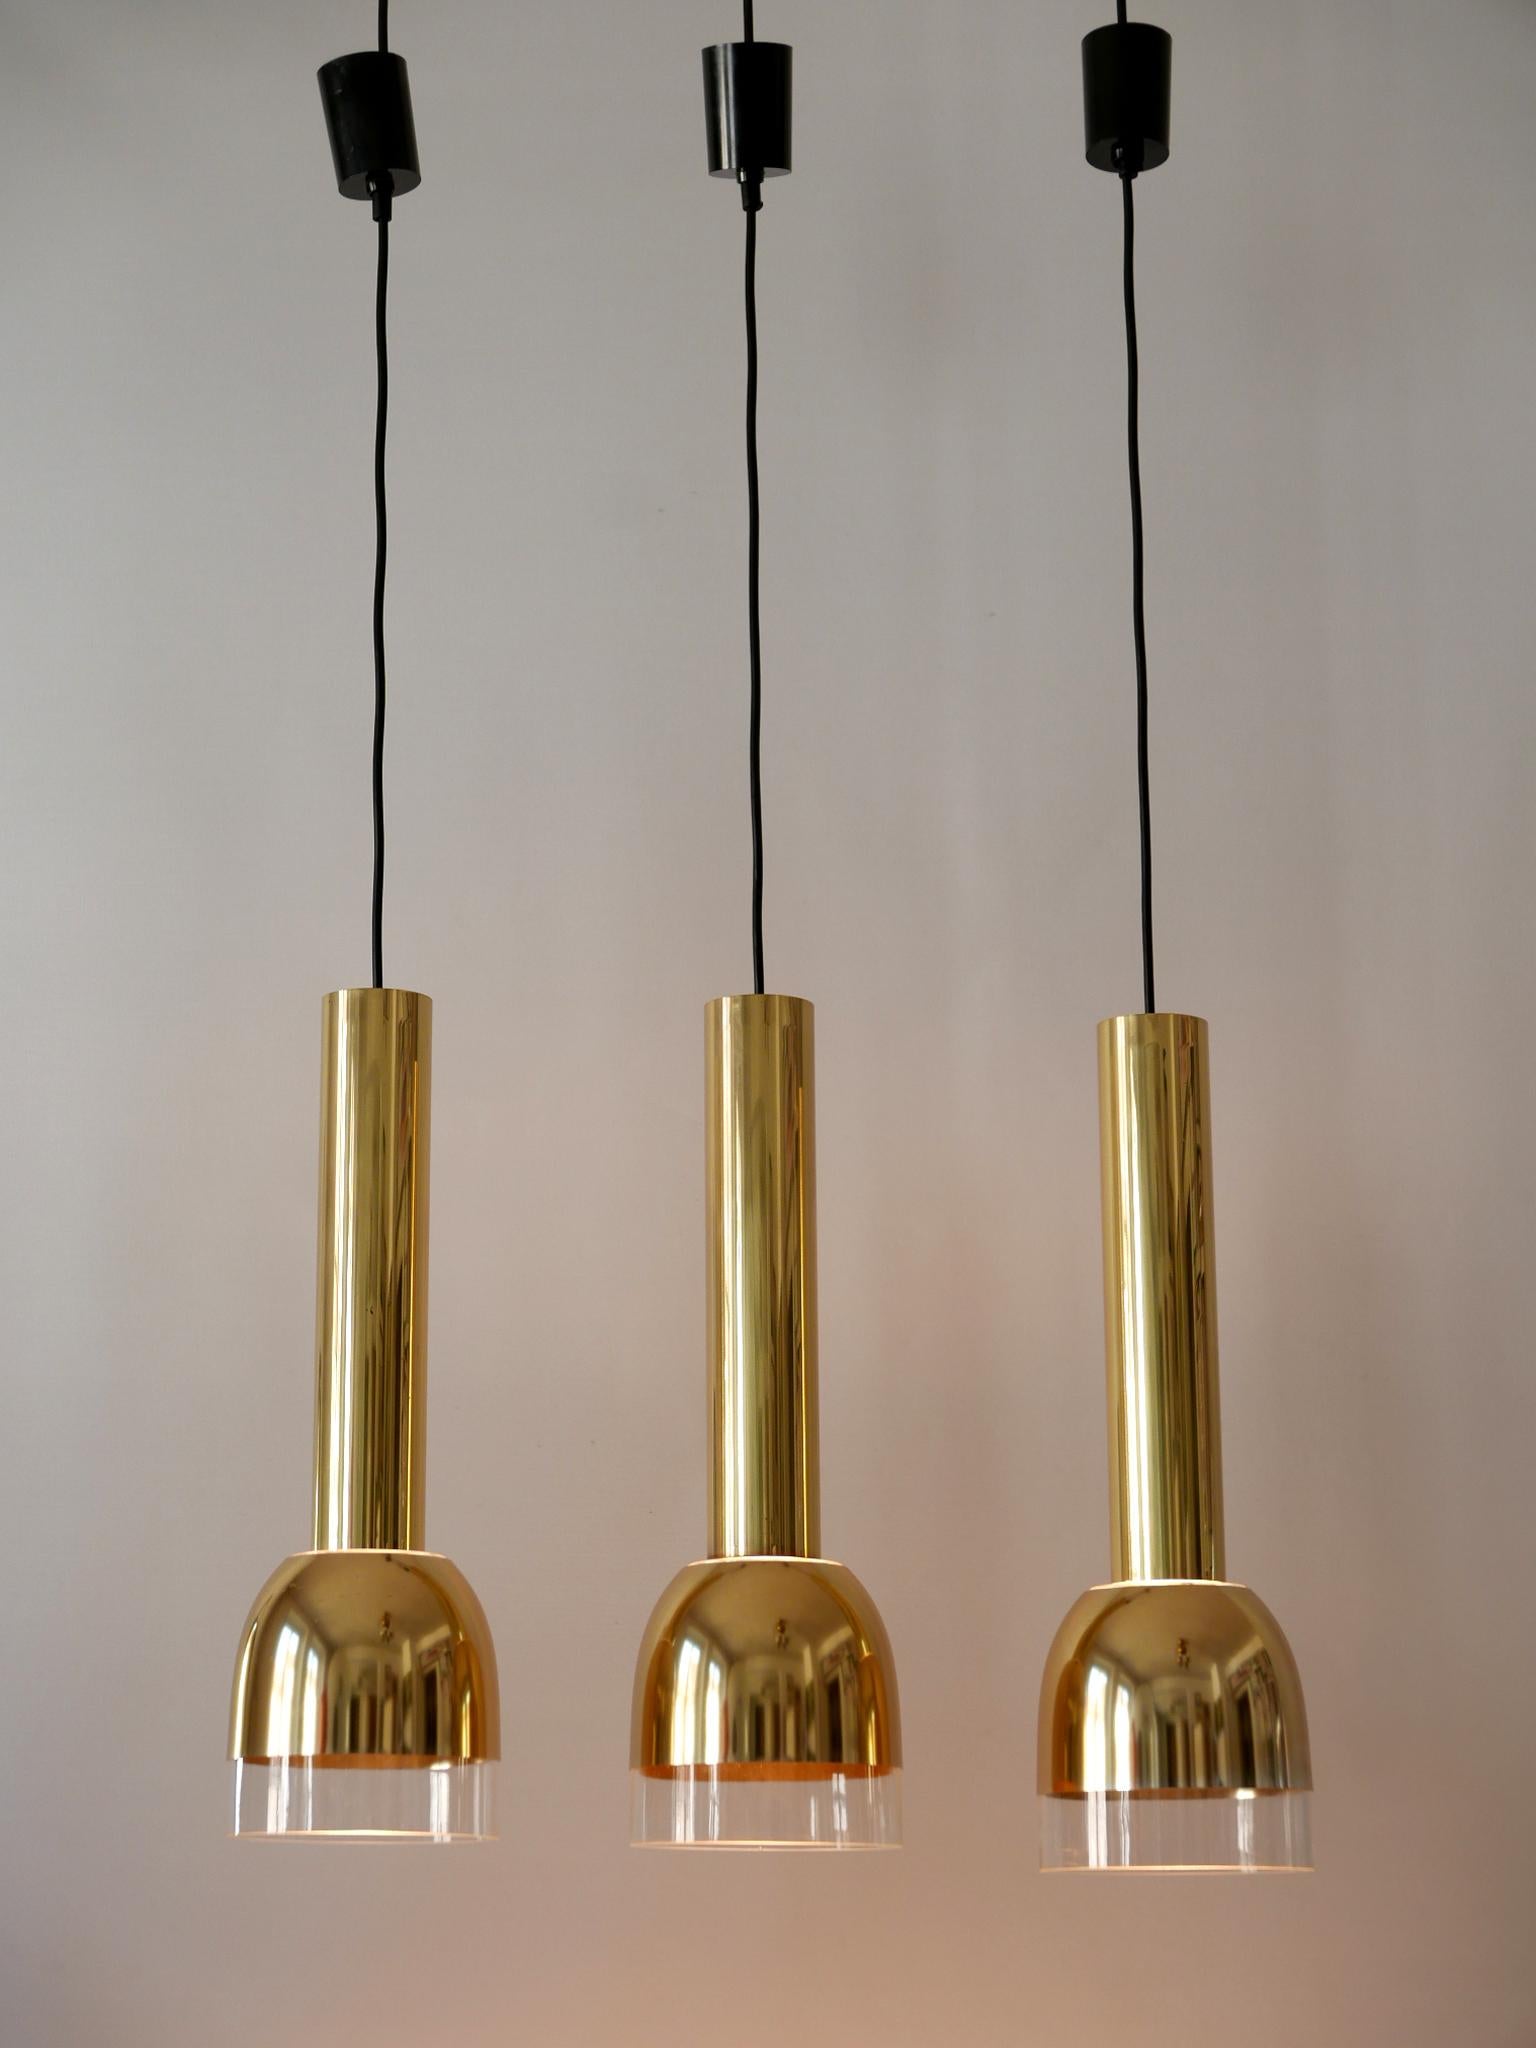 Set of three elegant Mid-Century Modern pendant lamps. Designed and manufactured by Glashütte Limburg, Germany, 1970s.

Executed in brass, gold anodized aluminium and glass, each lamp needs 1 x E27 / E26 Edison screw fit bulb, is rewired. It runs